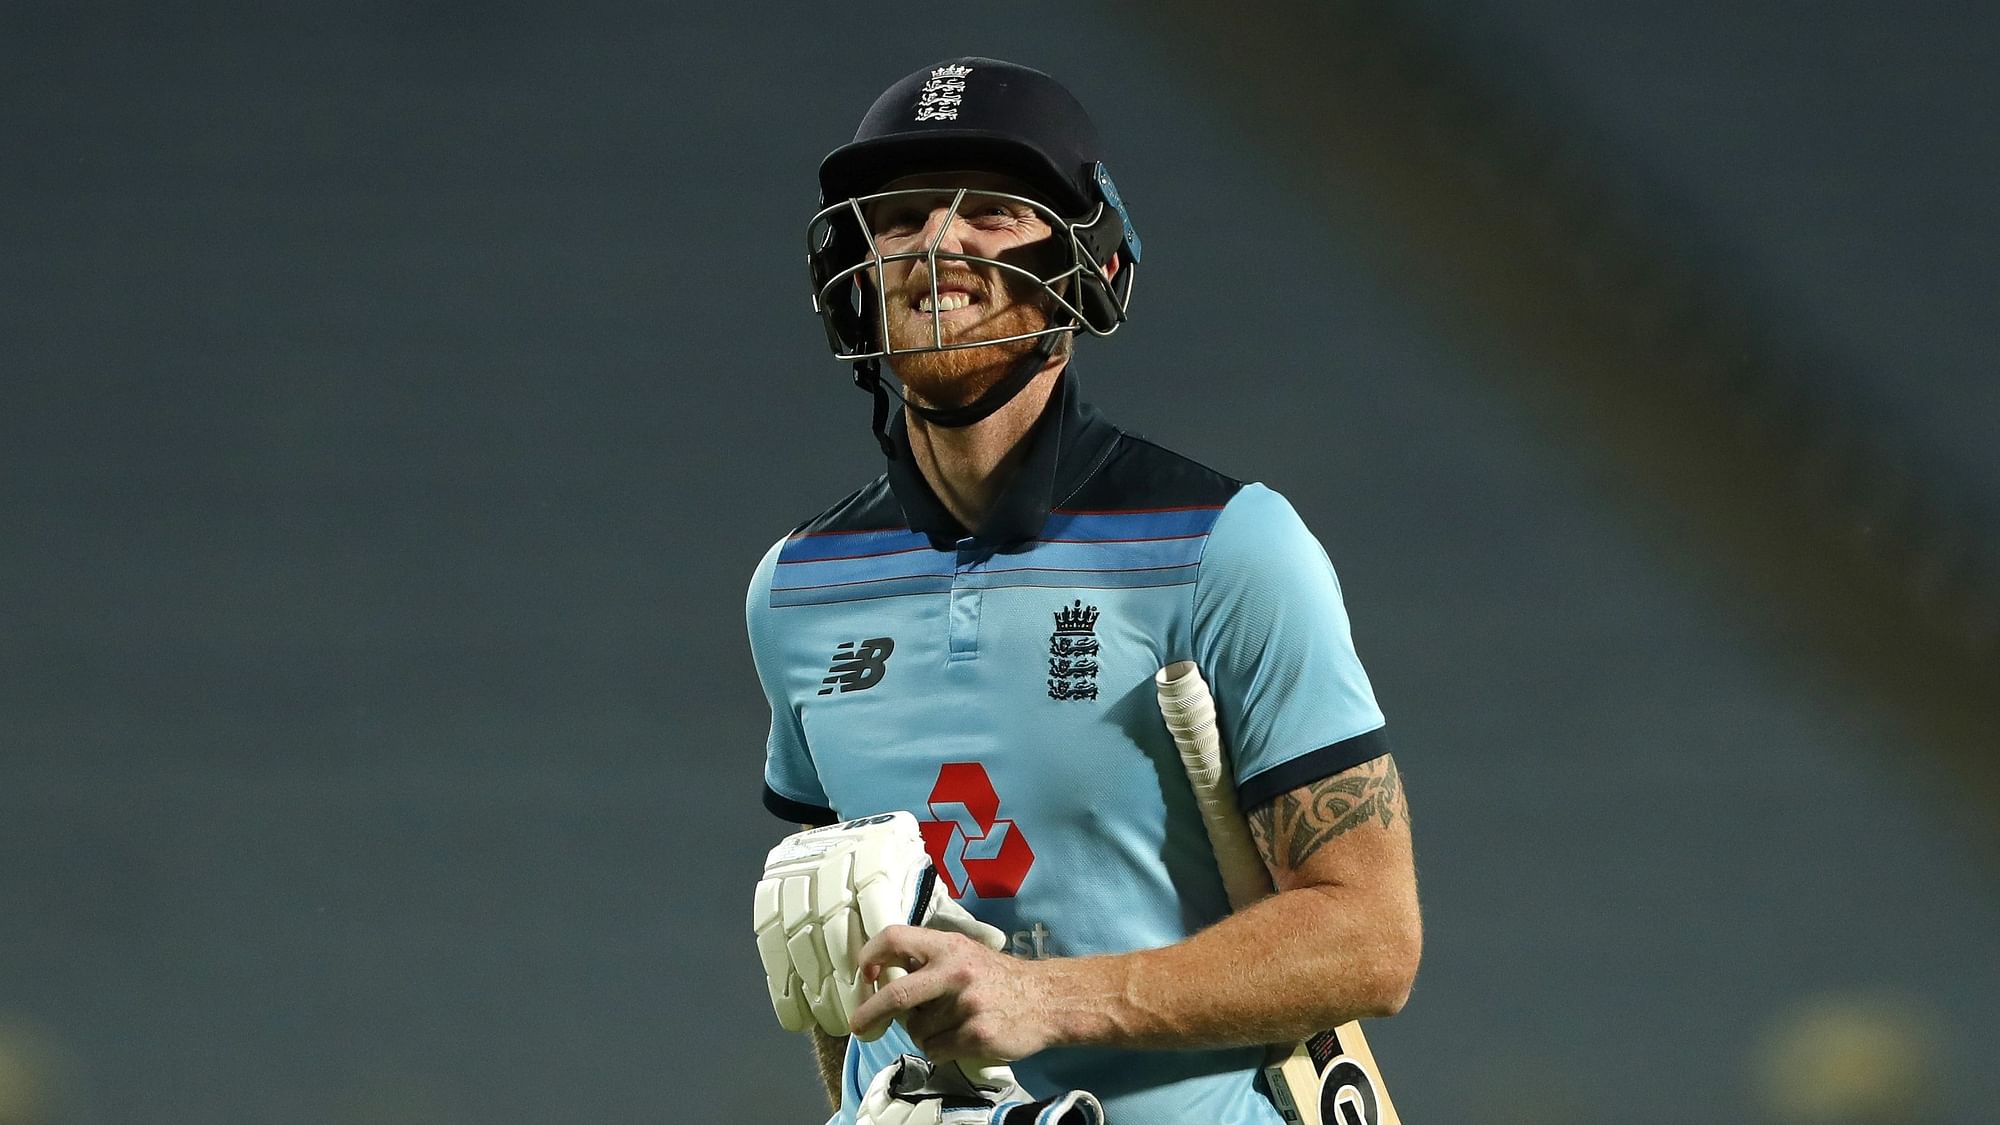 <div class="paragraphs"><p>England all-rounder Ben Stokes has taken an indefinite break from all cricket to prioritise mental health and focus on resting his index finger, England and Wales Cricket Board (ECB) said in a statement.</p></div>